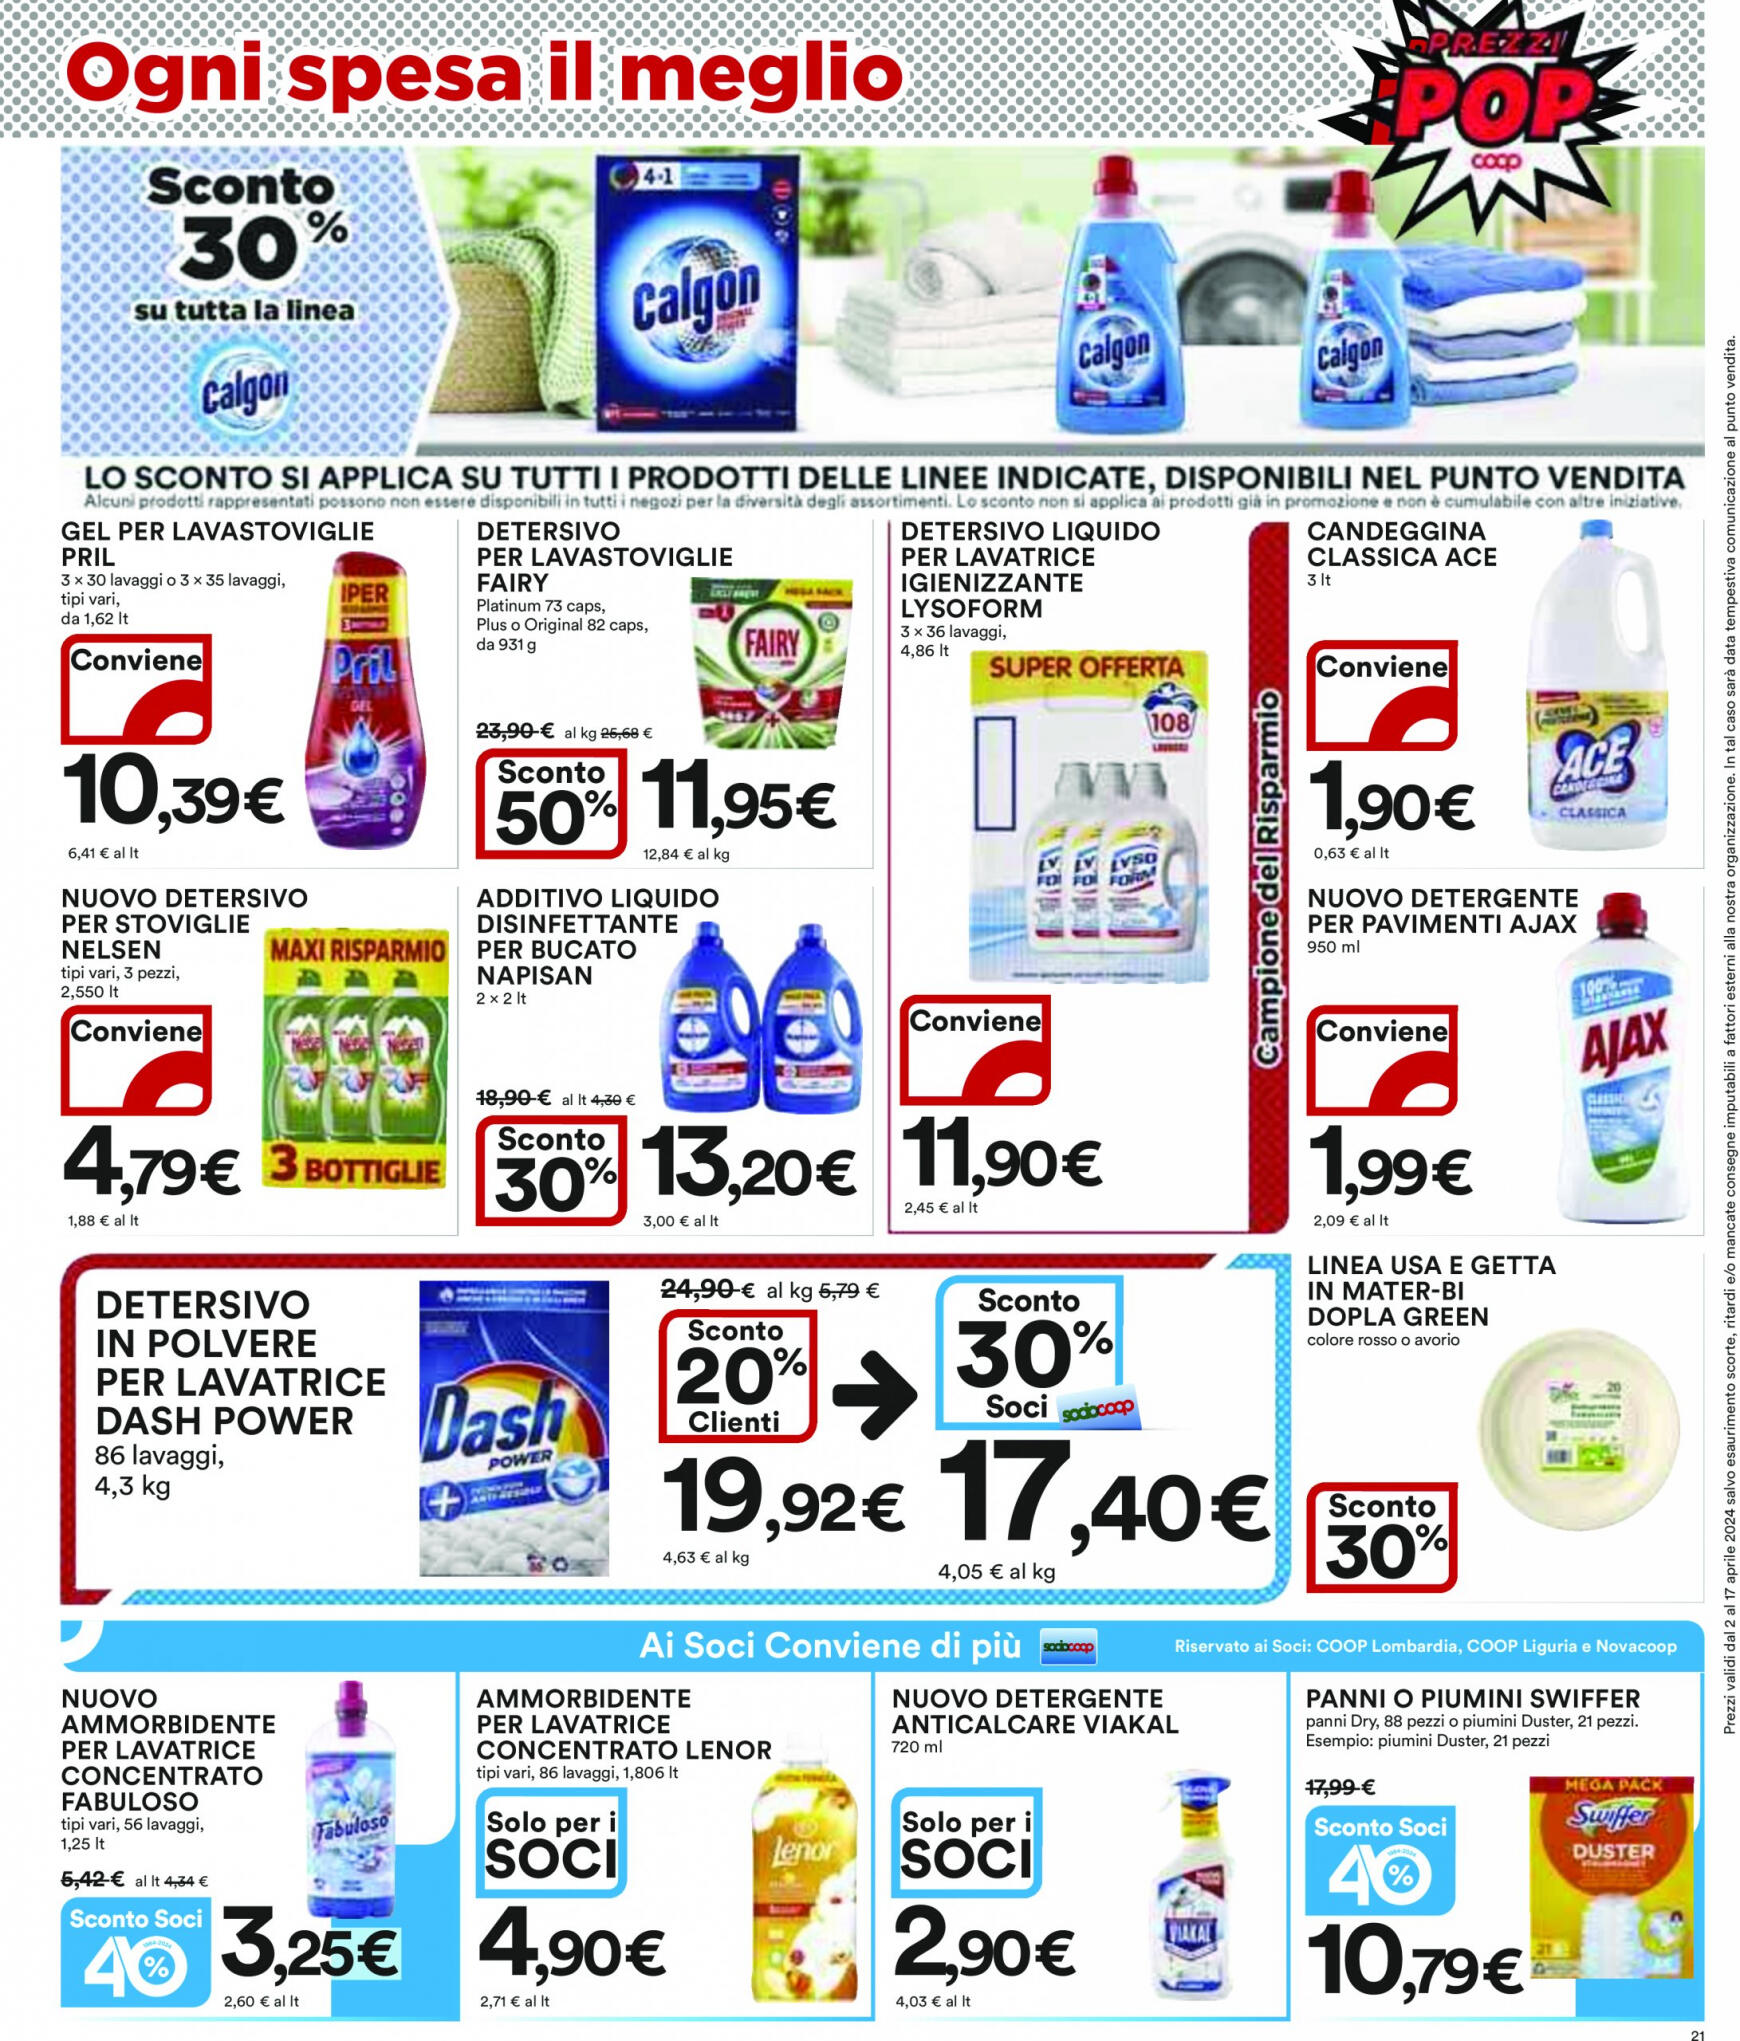 coop - Nuovo volantino Coop 02.04. - 17.04. - page: 21